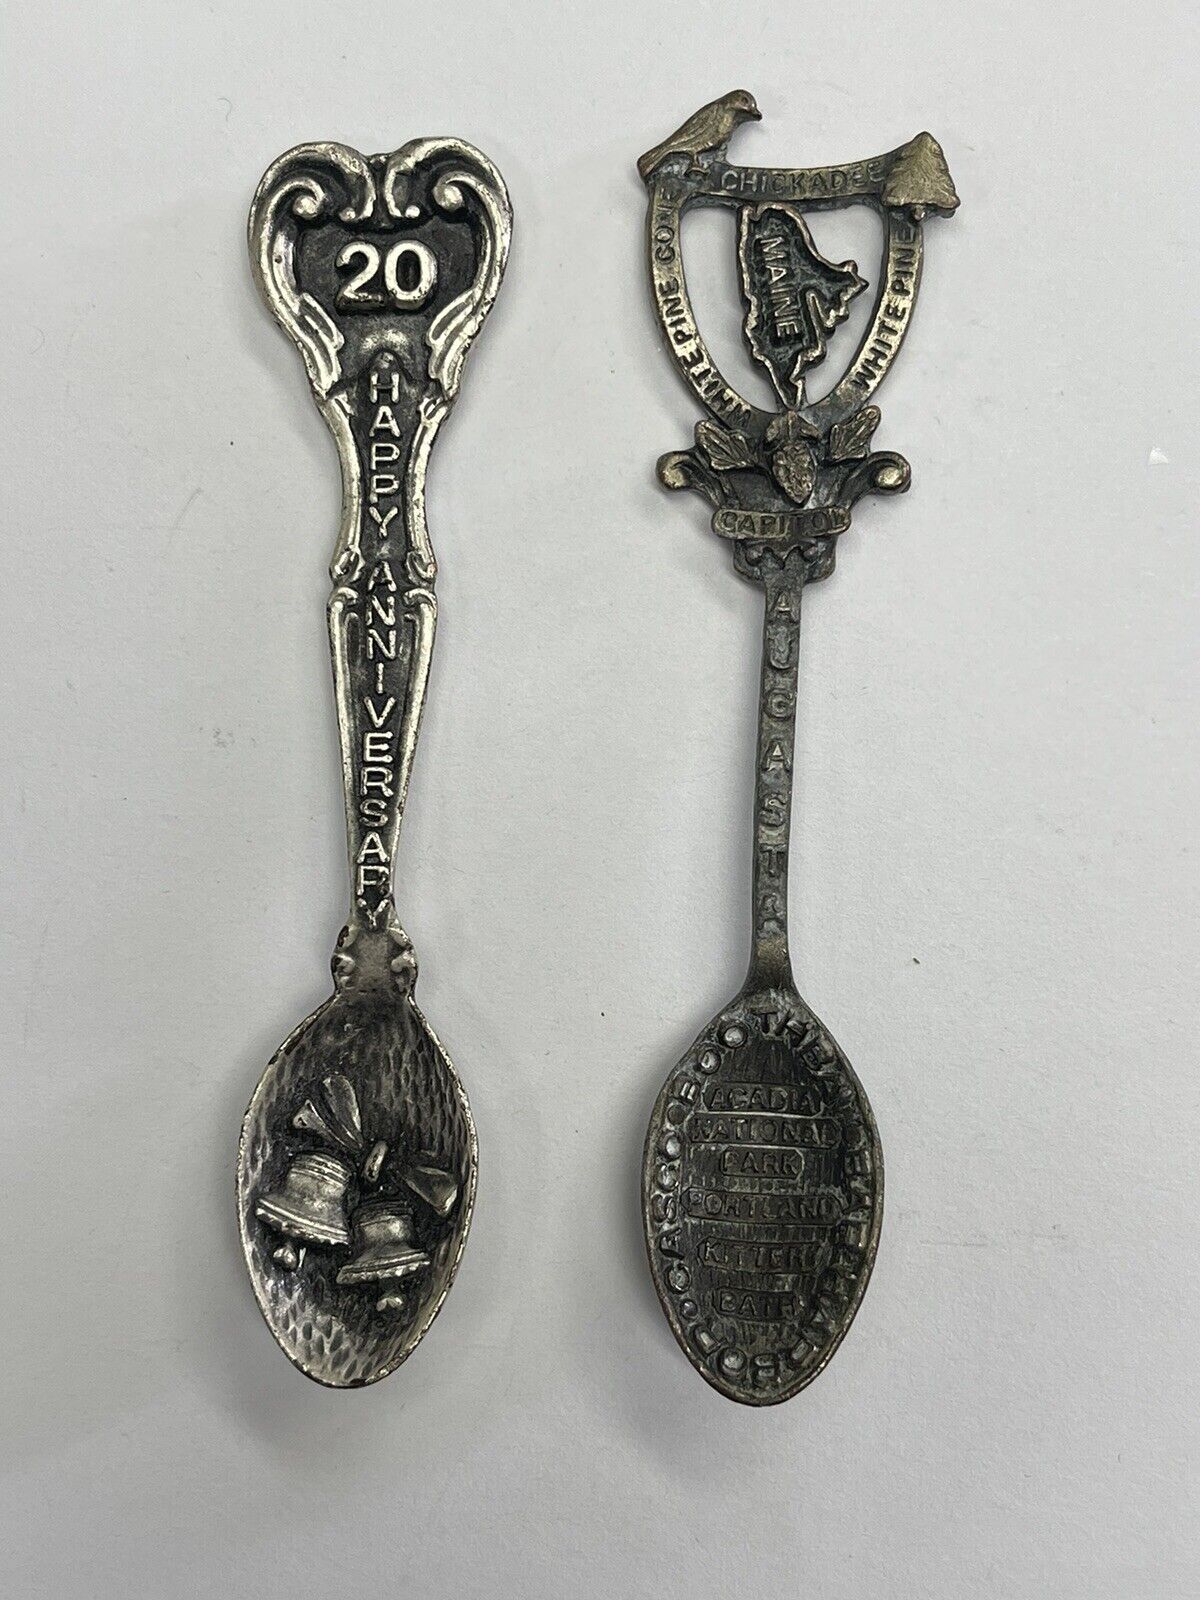 2 Gish Collectible Vintage Pewter Spoons. State Maine and 20 Happy Anniversary